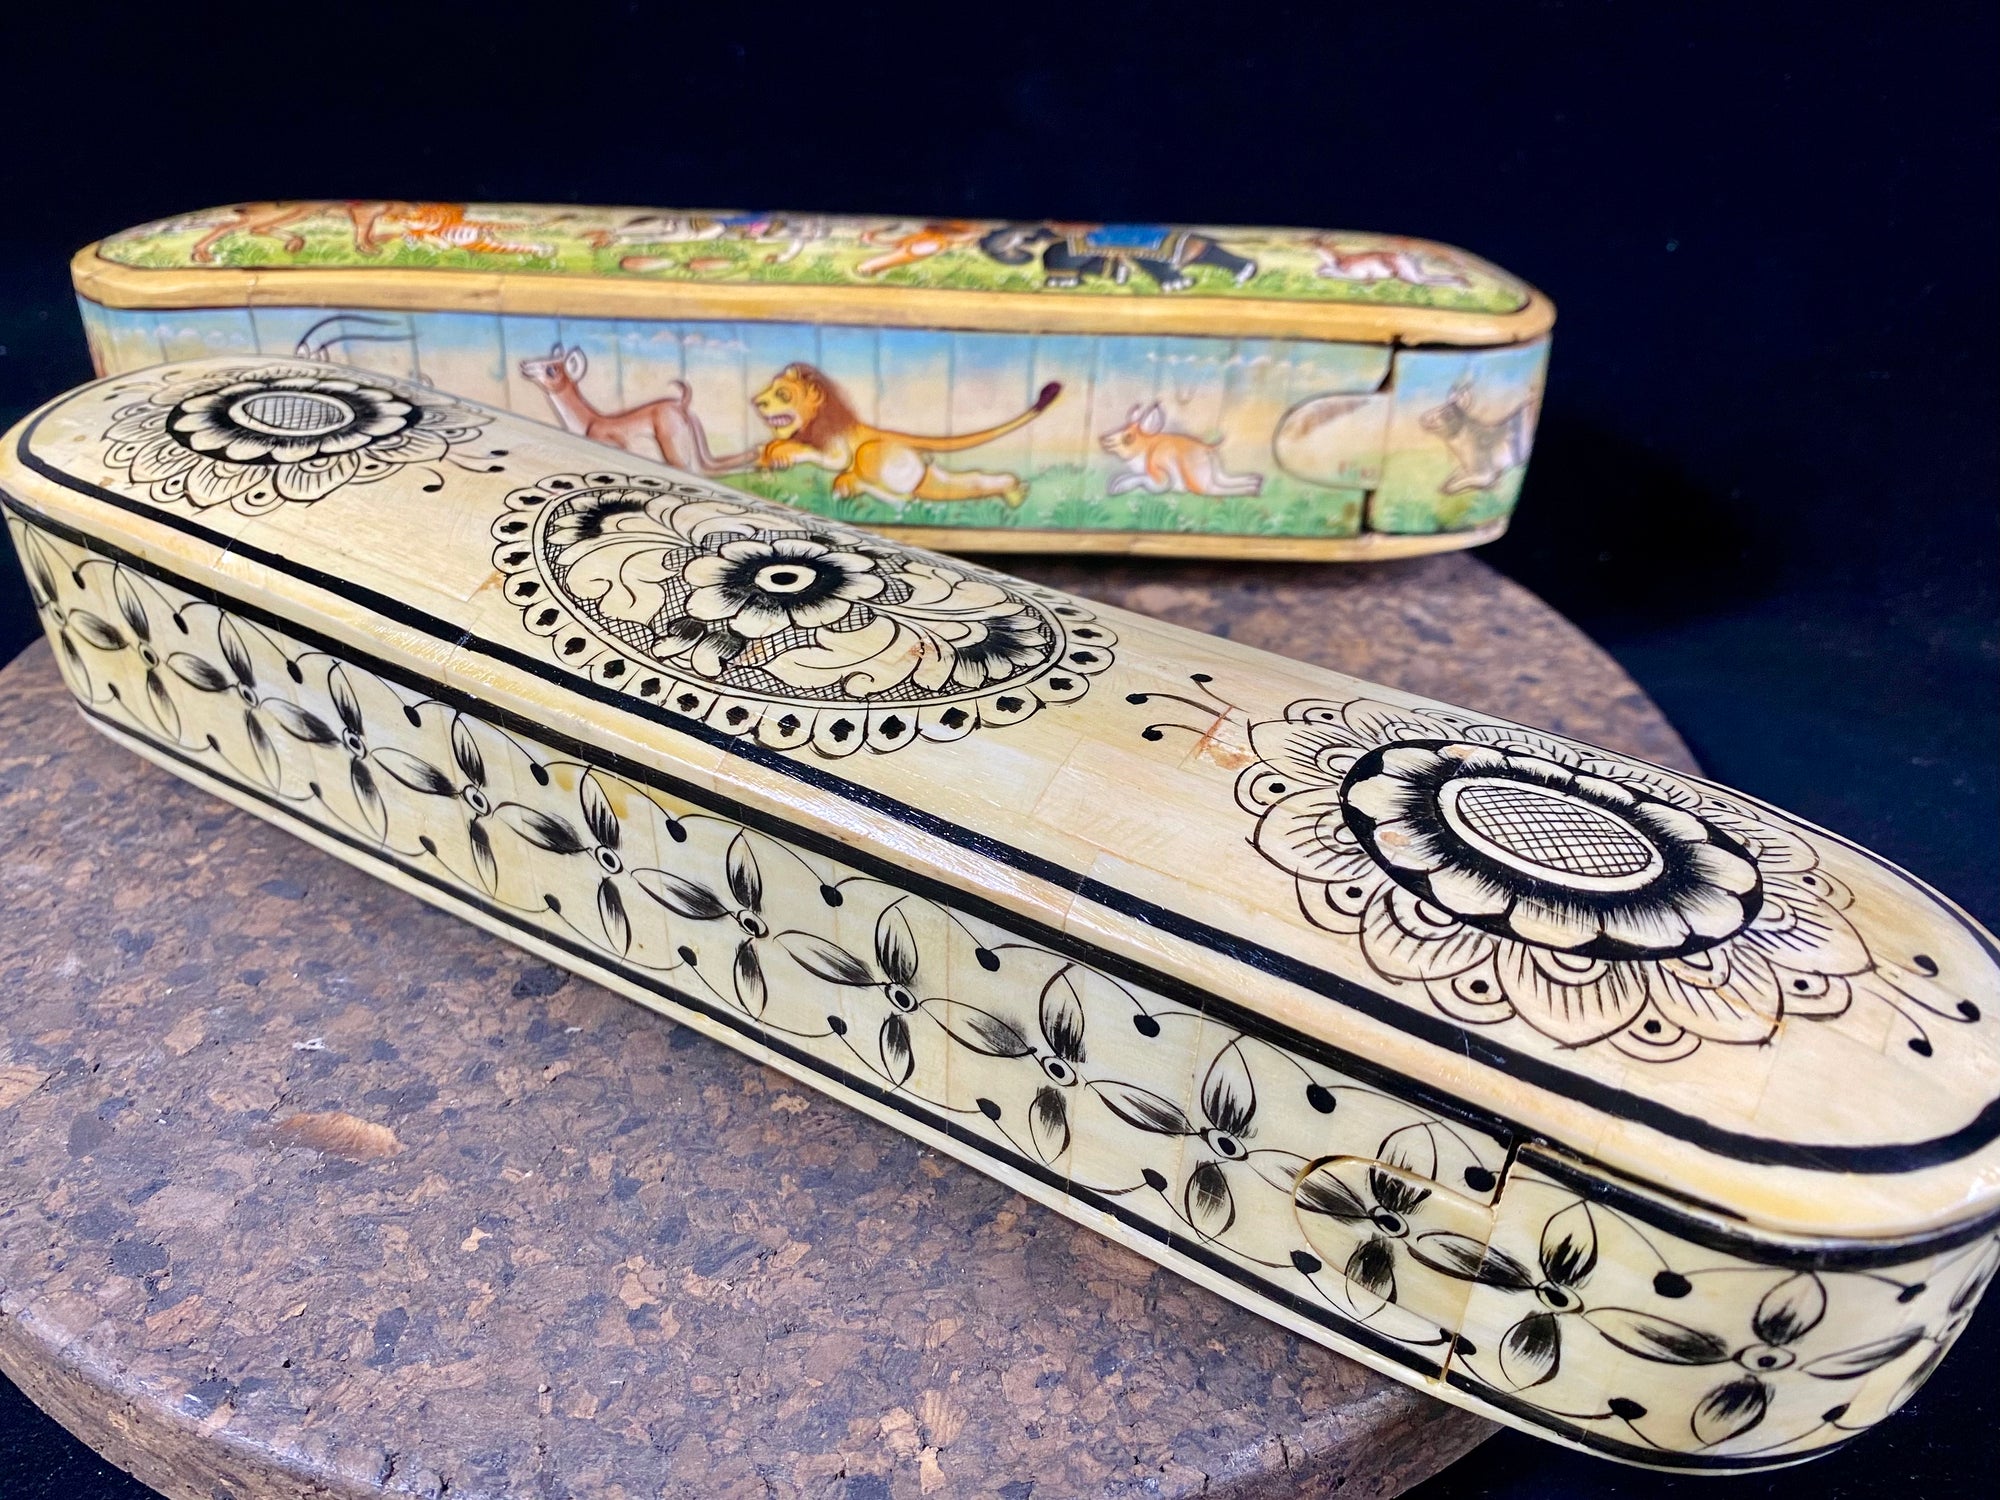 traditional Indian pen boxes. Crafted from panels of camel bone over wood, fitted together then painted with detailed scenes. Length 28 cm